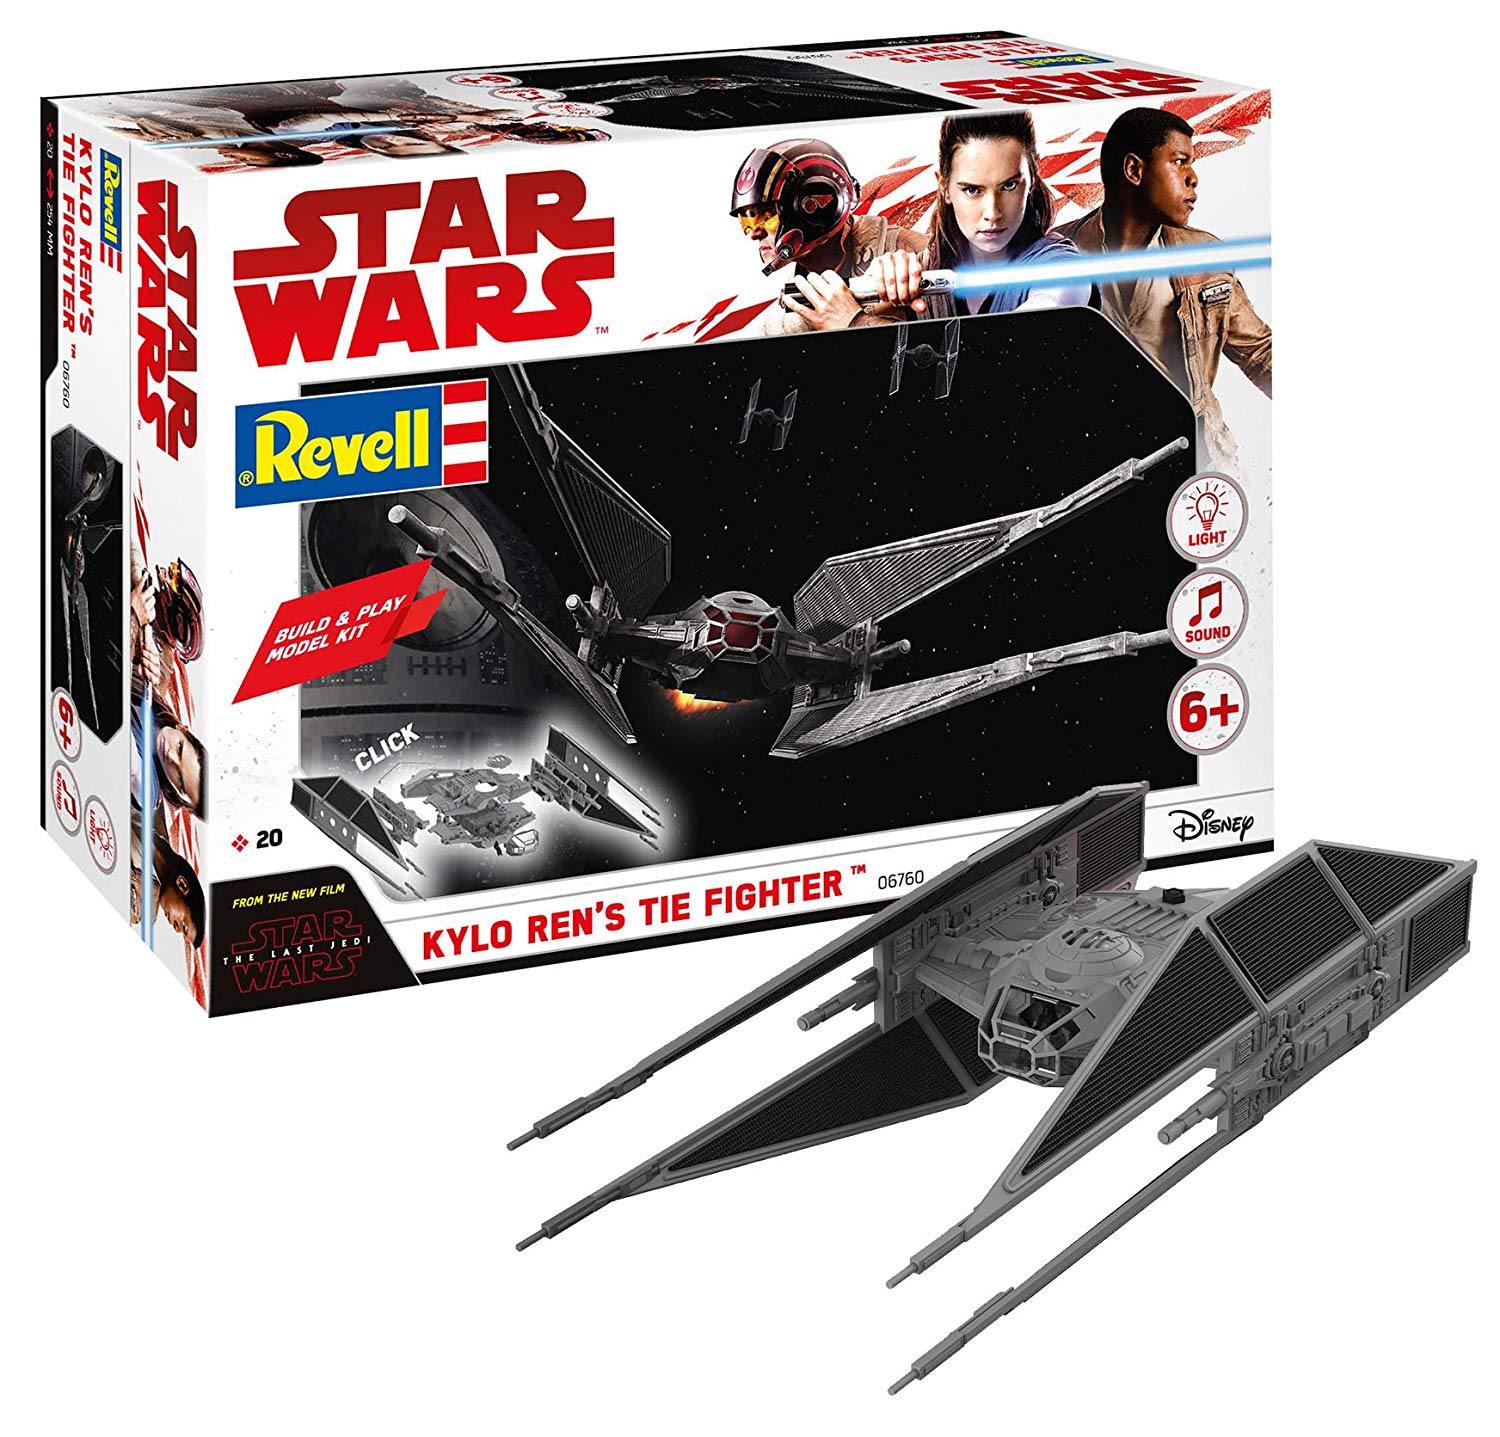 Revell Star Wars Build Play Kylo Rens Tie Fighter A